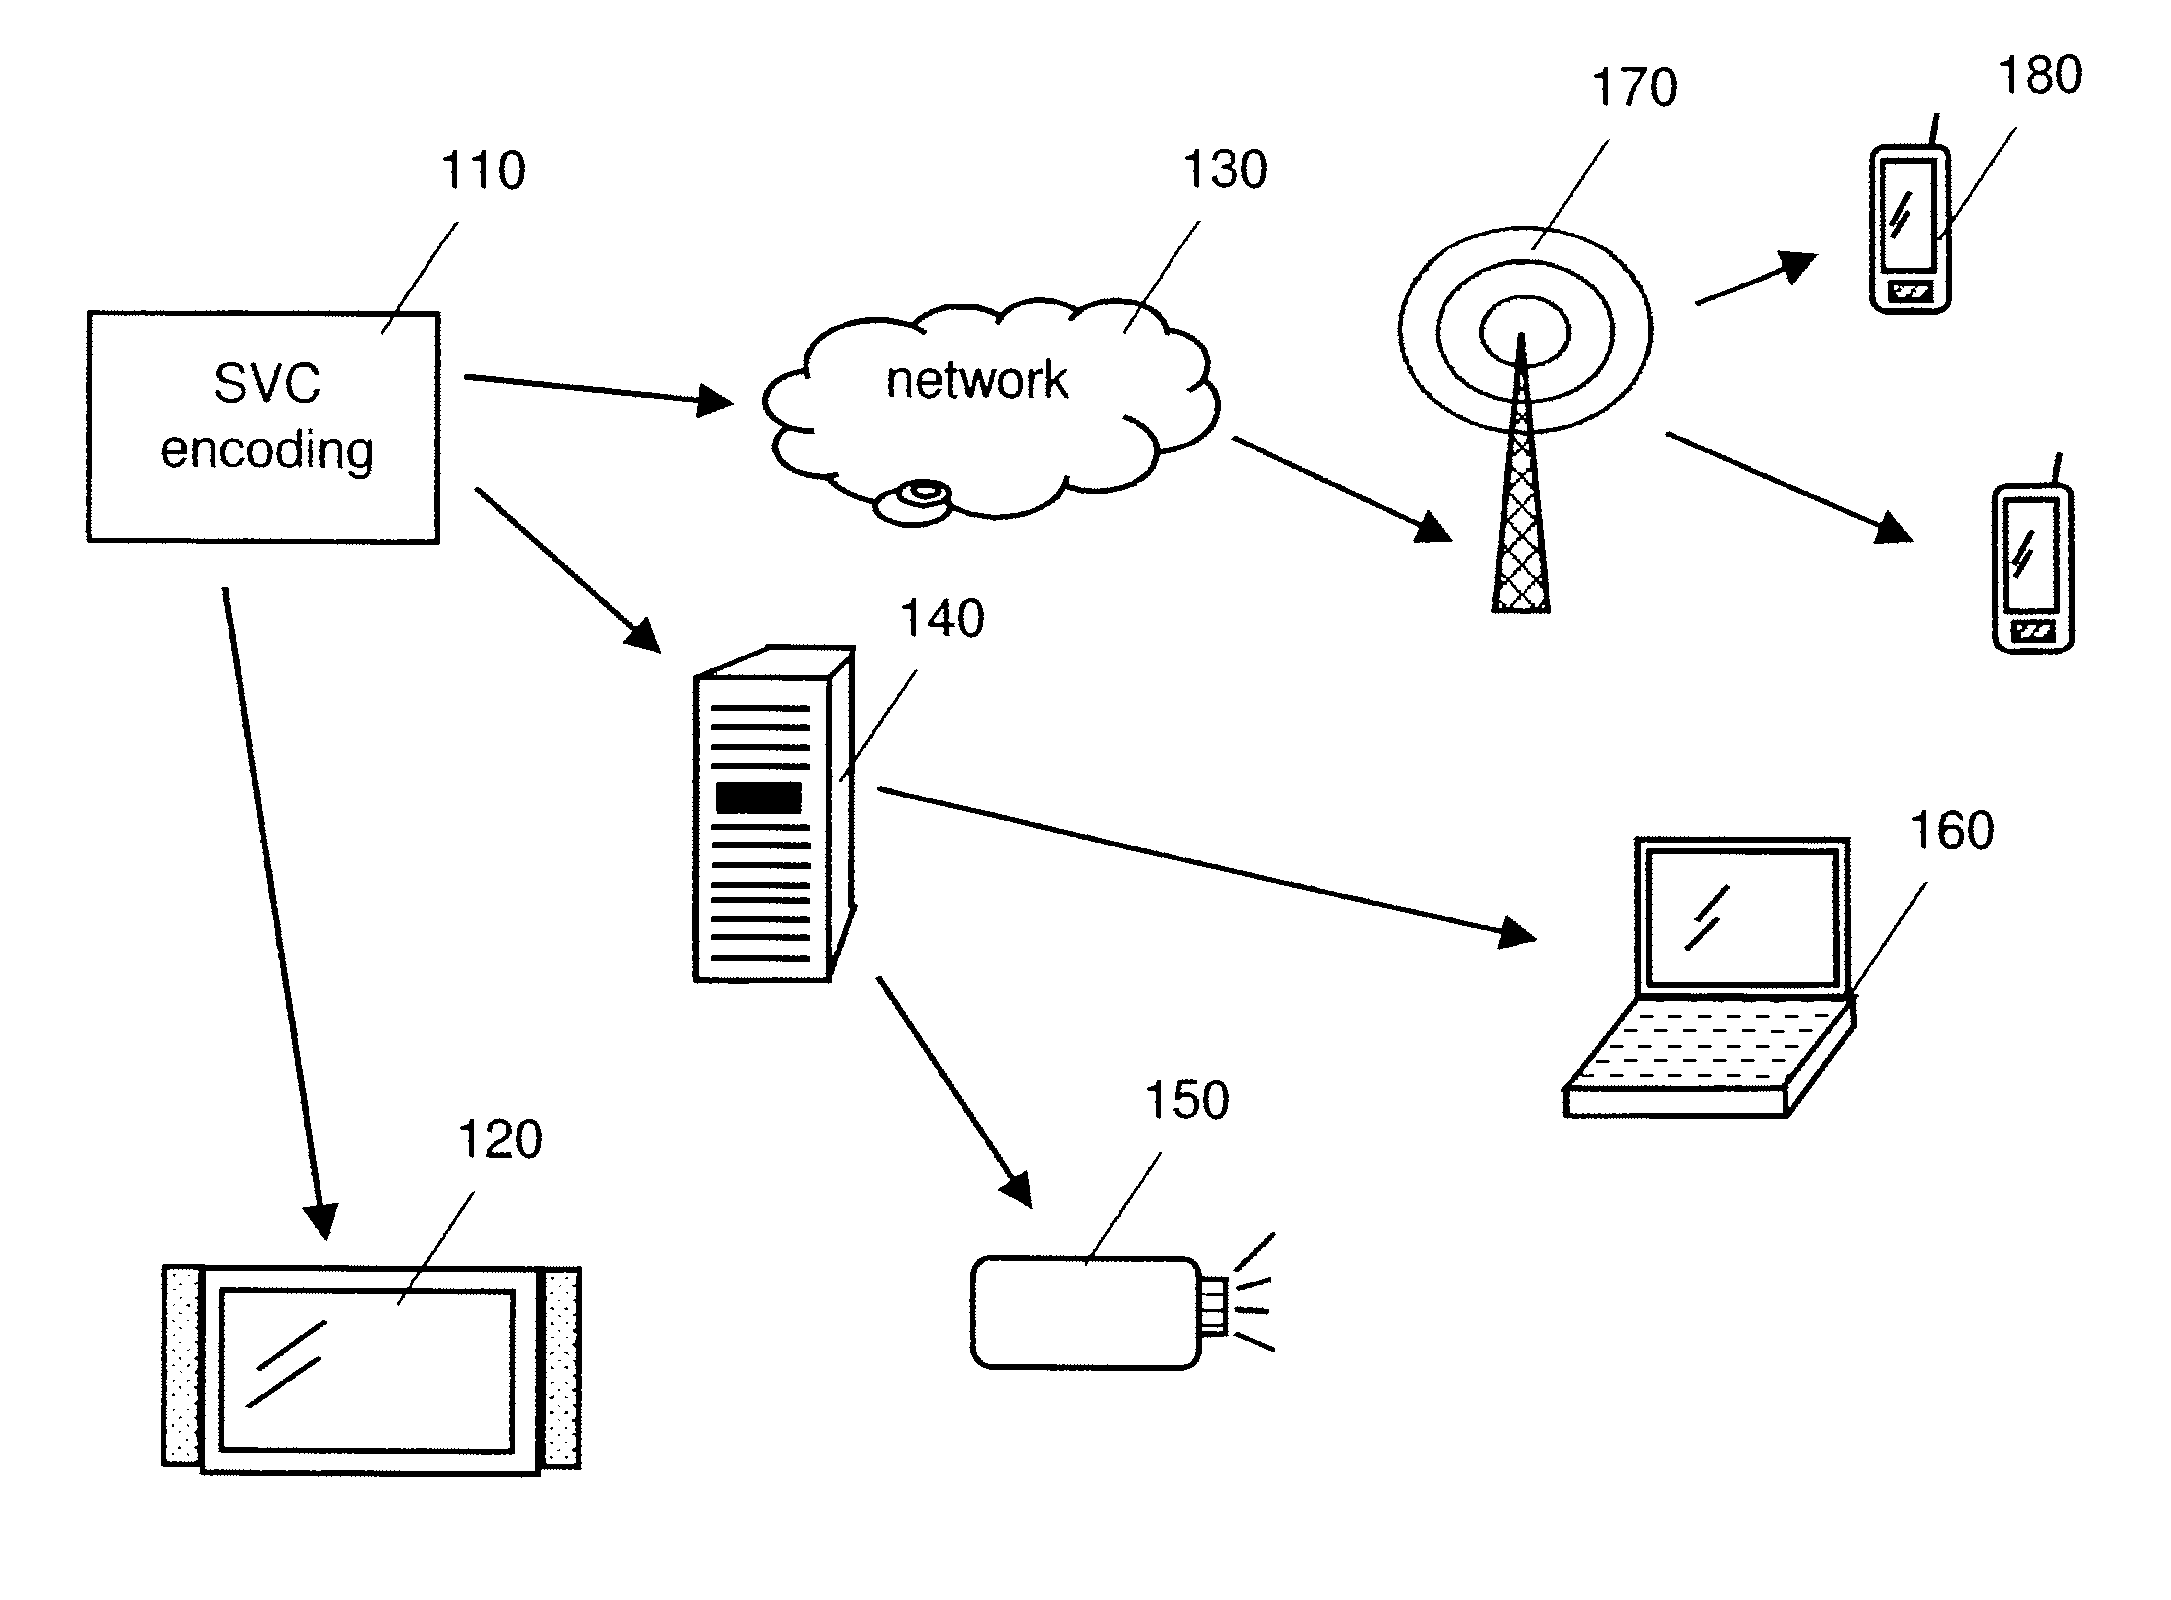 Parallel decoding for scalable video coding